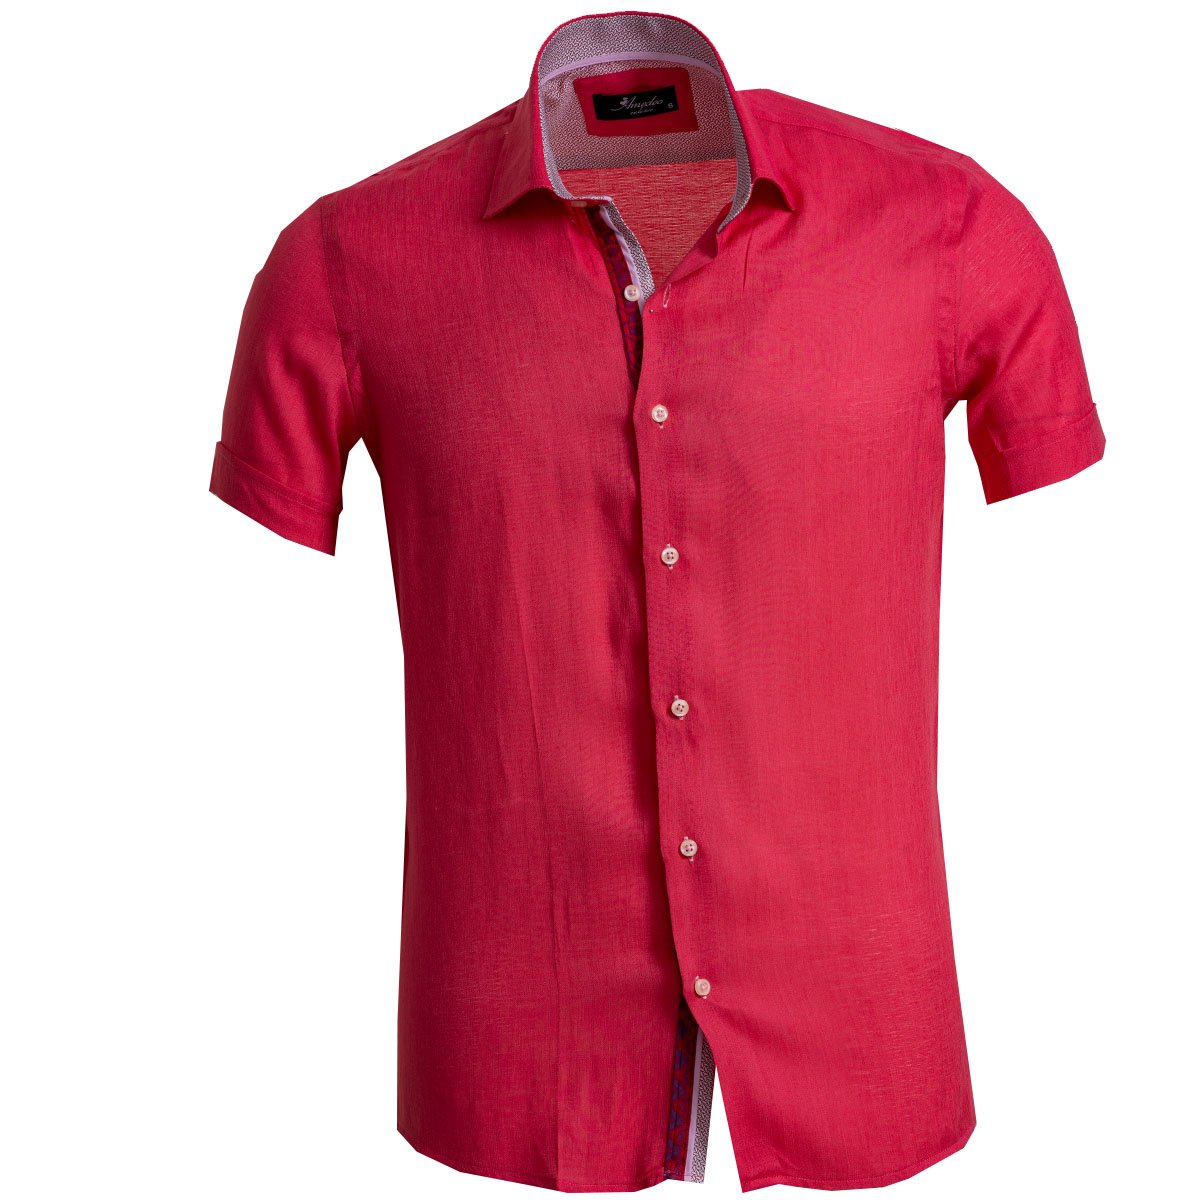 Red Casual Button Down Shirt | peacecommission.kdsg.gov.ng